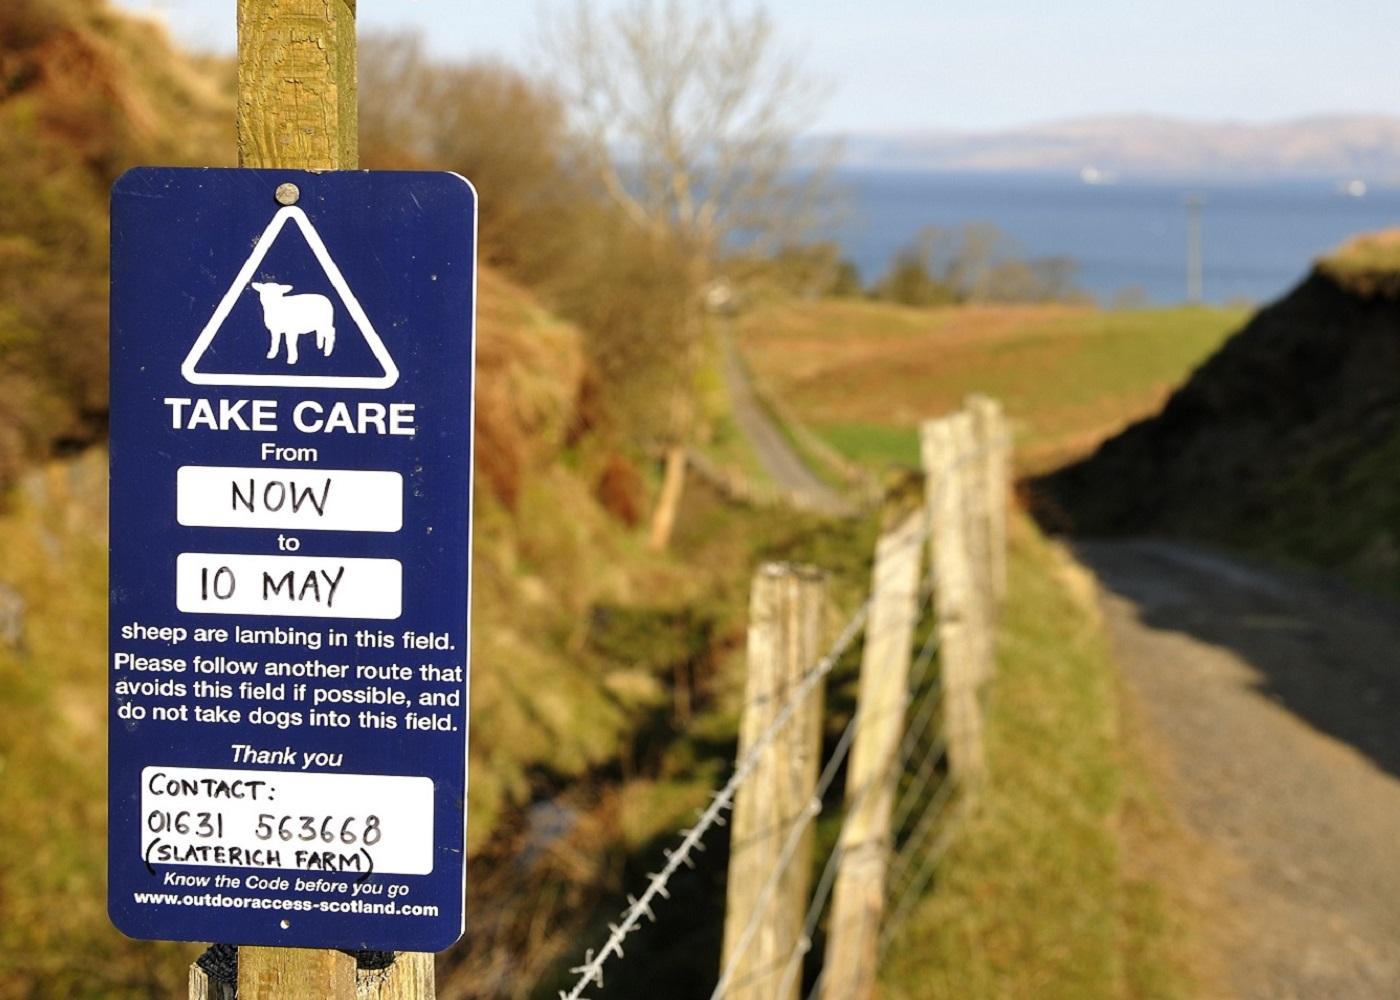 Blue sign on fence next to path advising of dates sheep are lambing in the field. 